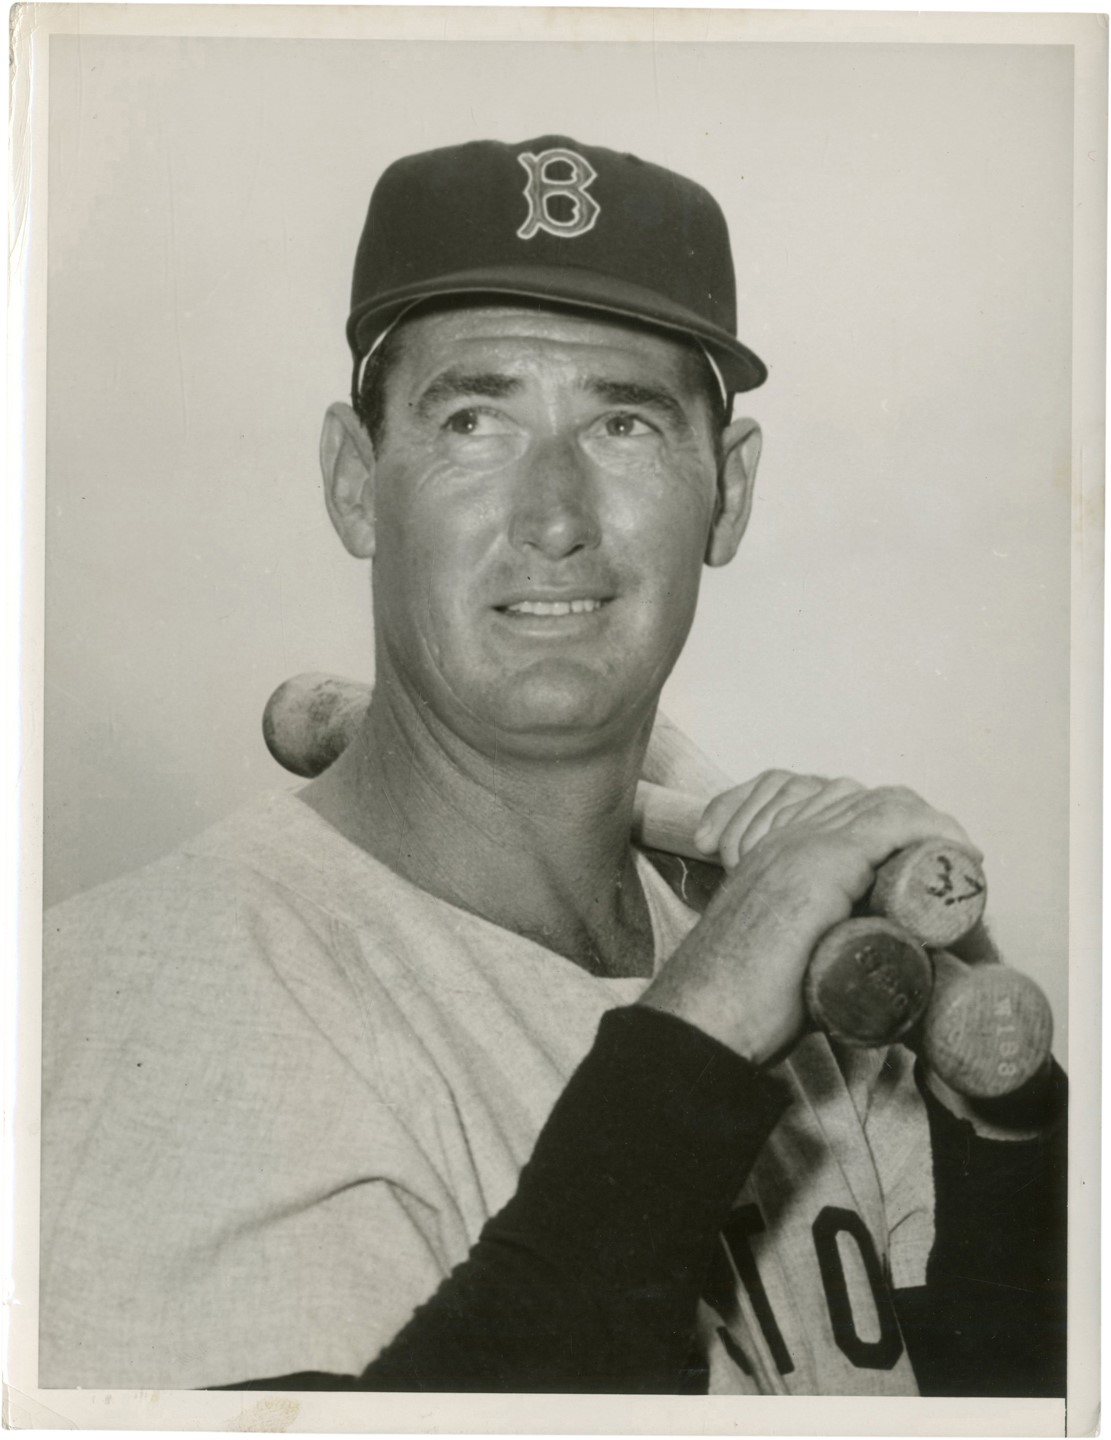 The Brown Brothers Collection - Superb Ted Williams Photograph